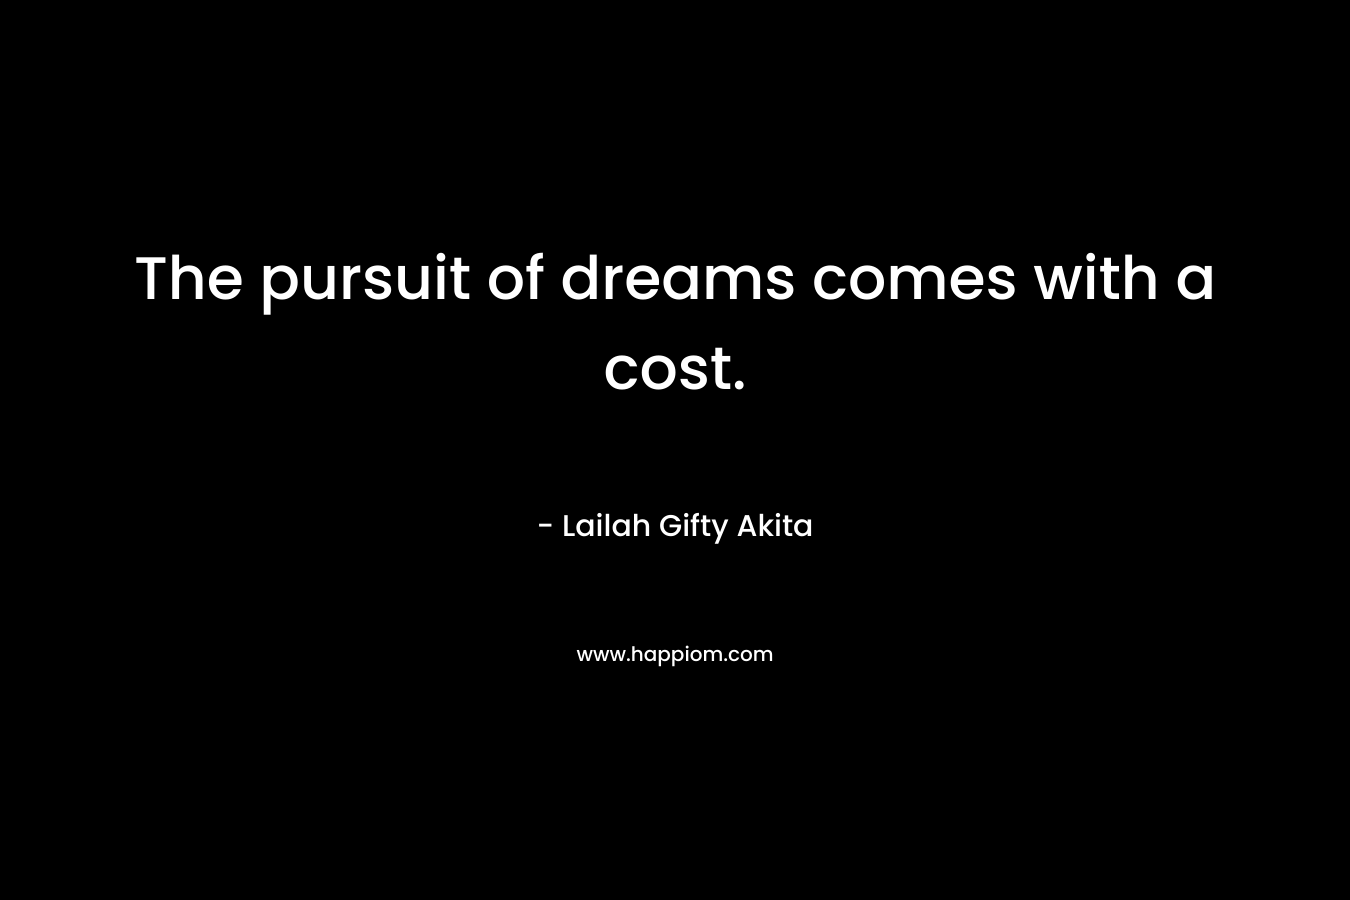 The pursuit of dreams comes with a cost.